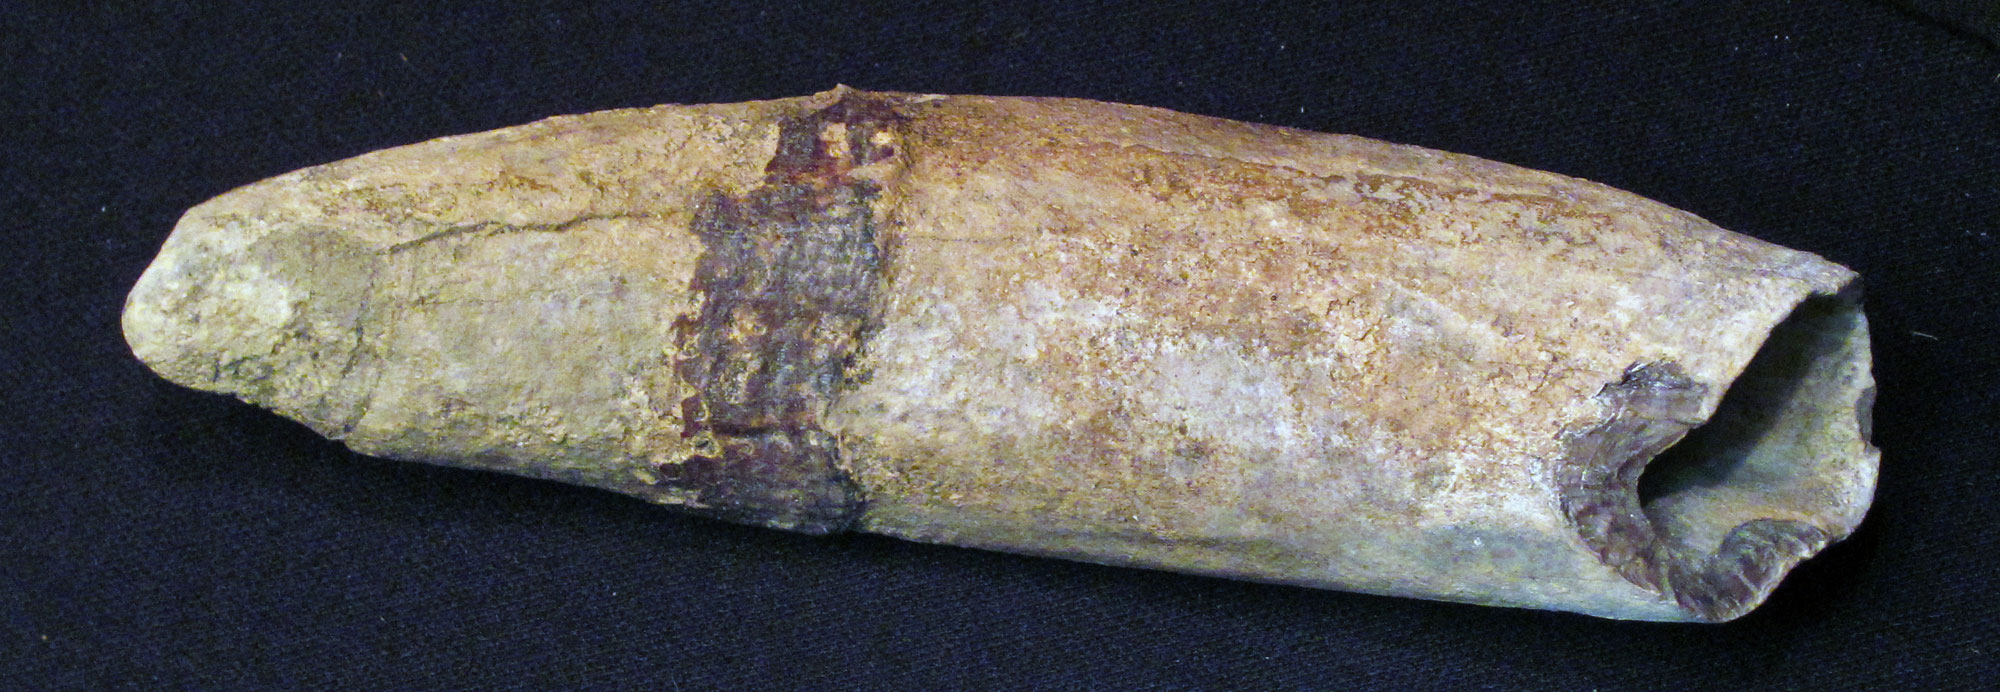 Photograph of a fossil sperm whale tooth. The tooth is elongate with a hollow base.